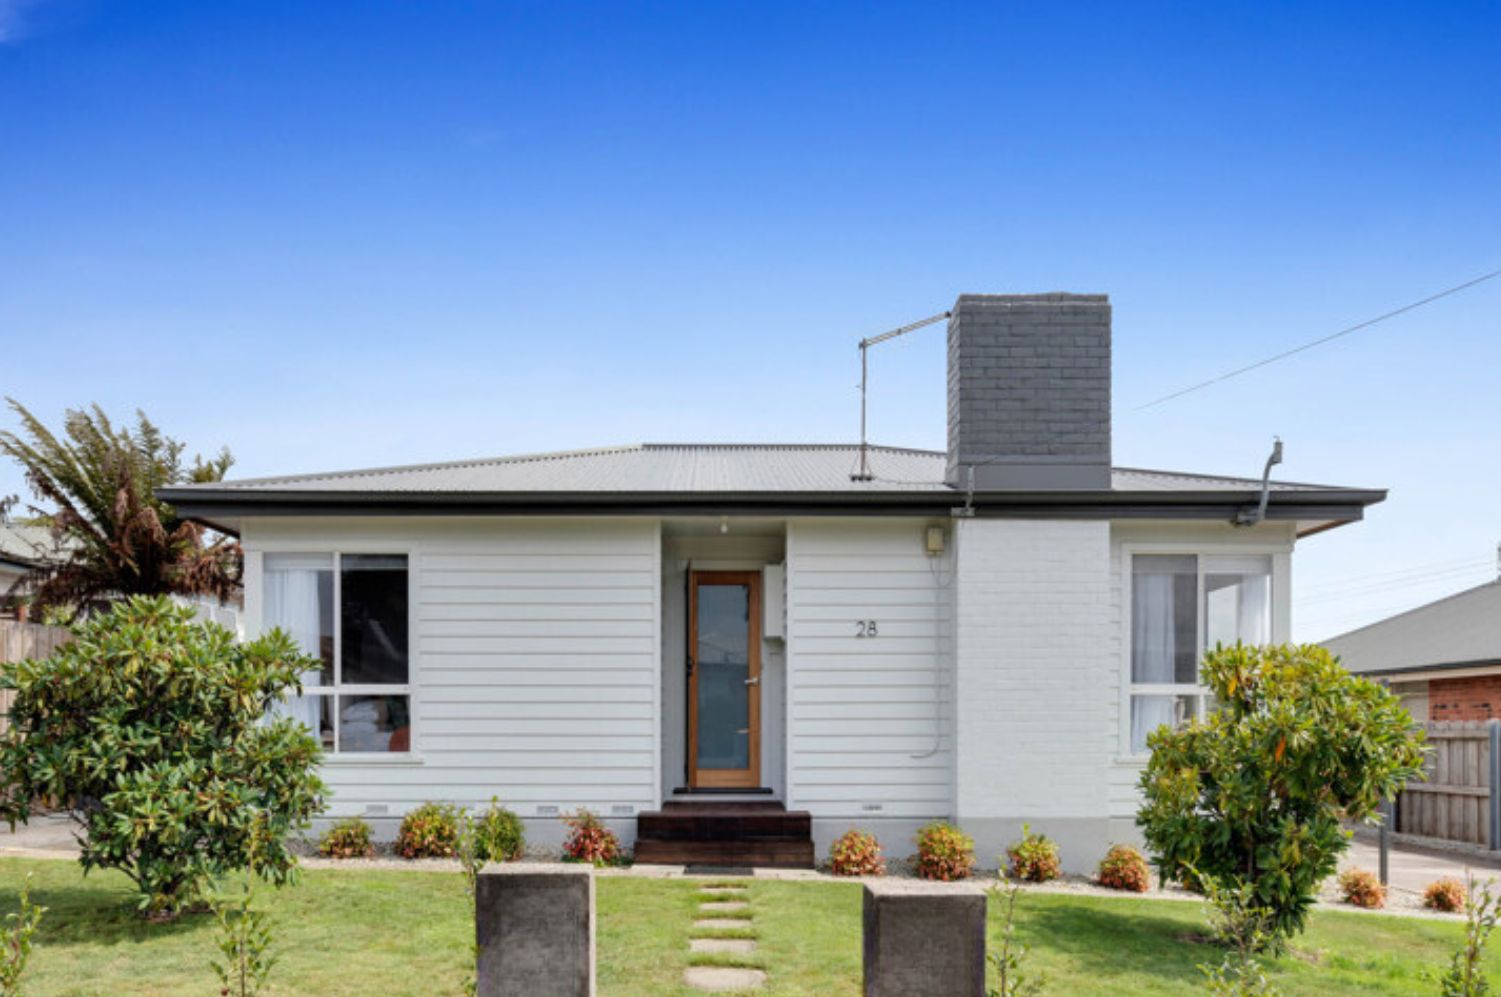 2 bedrooms House in 1/28 Brooklyn Road YOUNGTOWN TAS, 7249